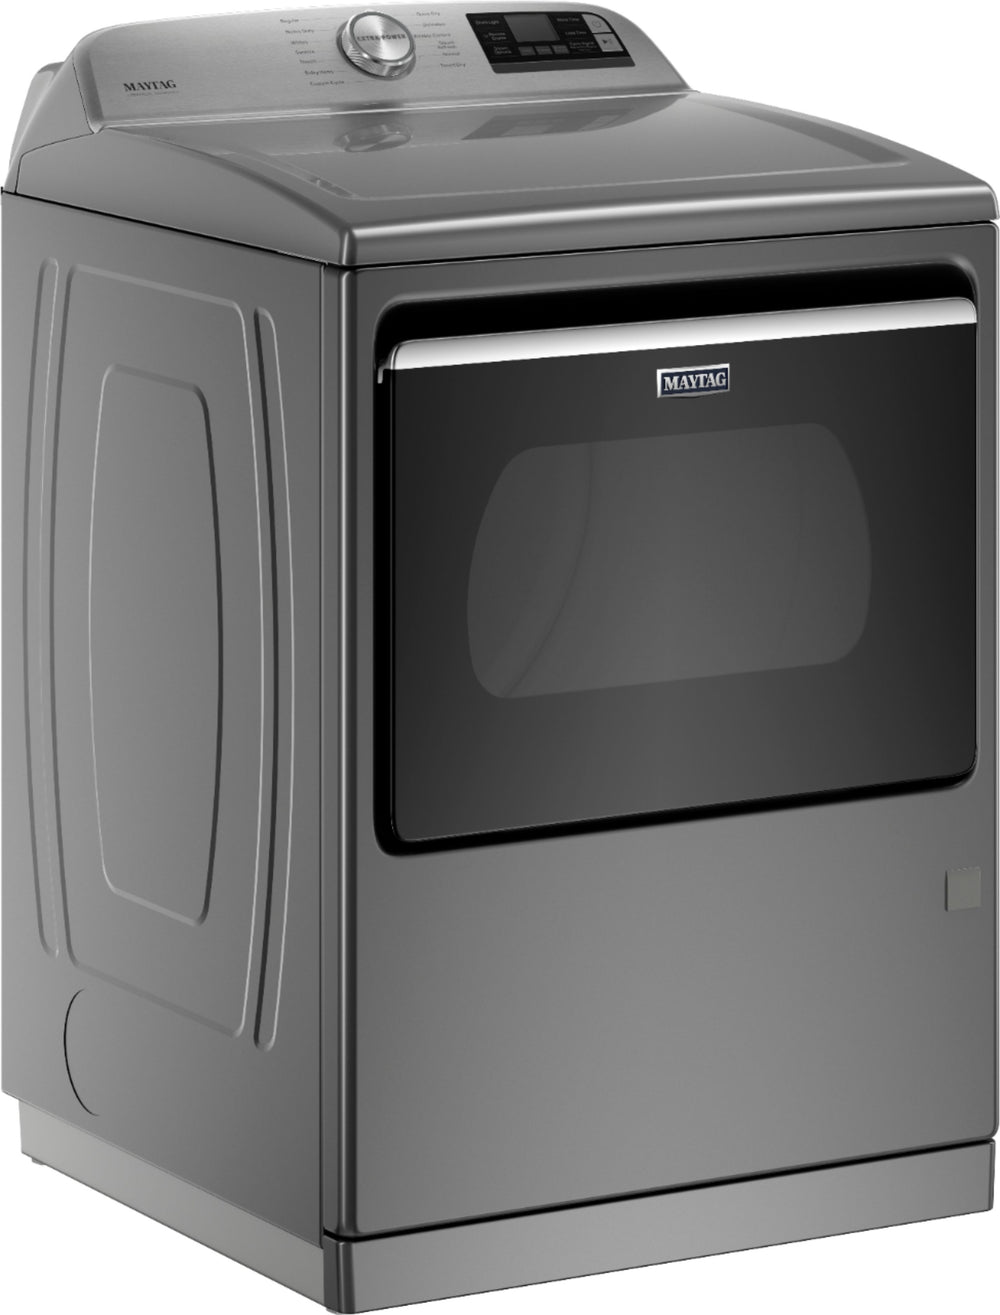 Maytag - 7.4 Cu. Ft. Smart Gas Dryer with Steam and Extra Power Button - Metallic slate_1